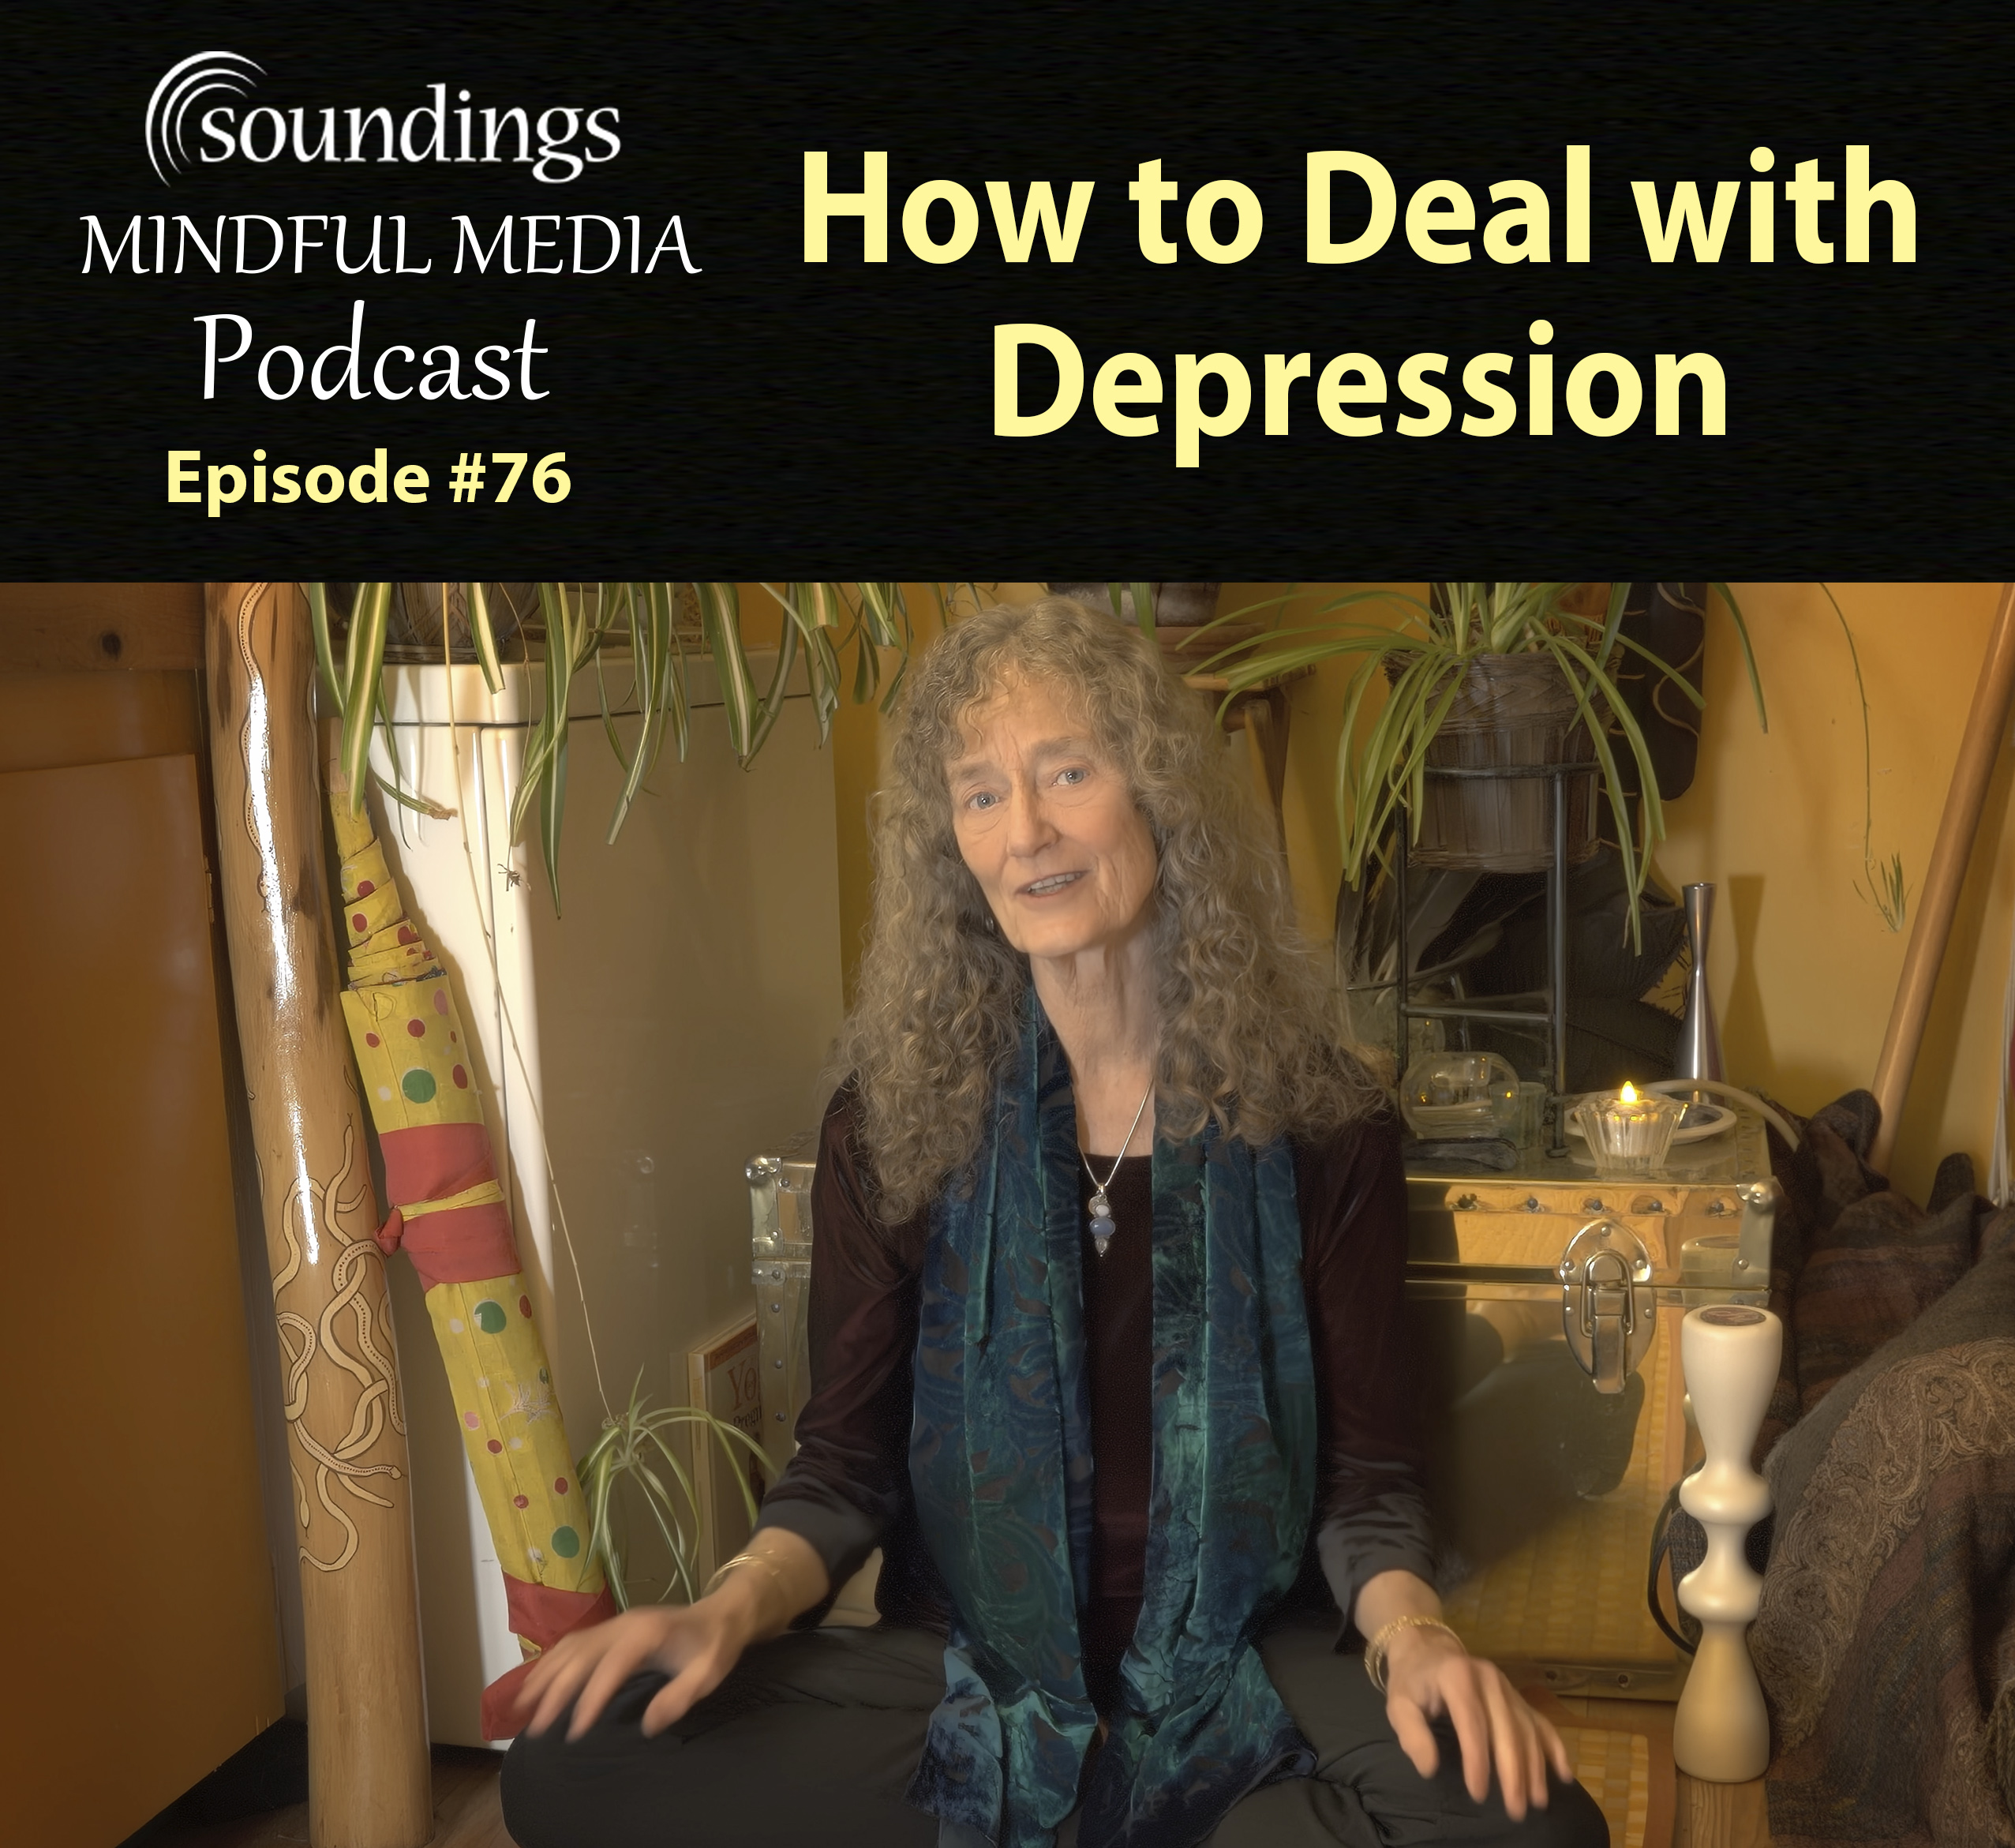 How to Deal with Depression on Soundings Mindful Media Podcast